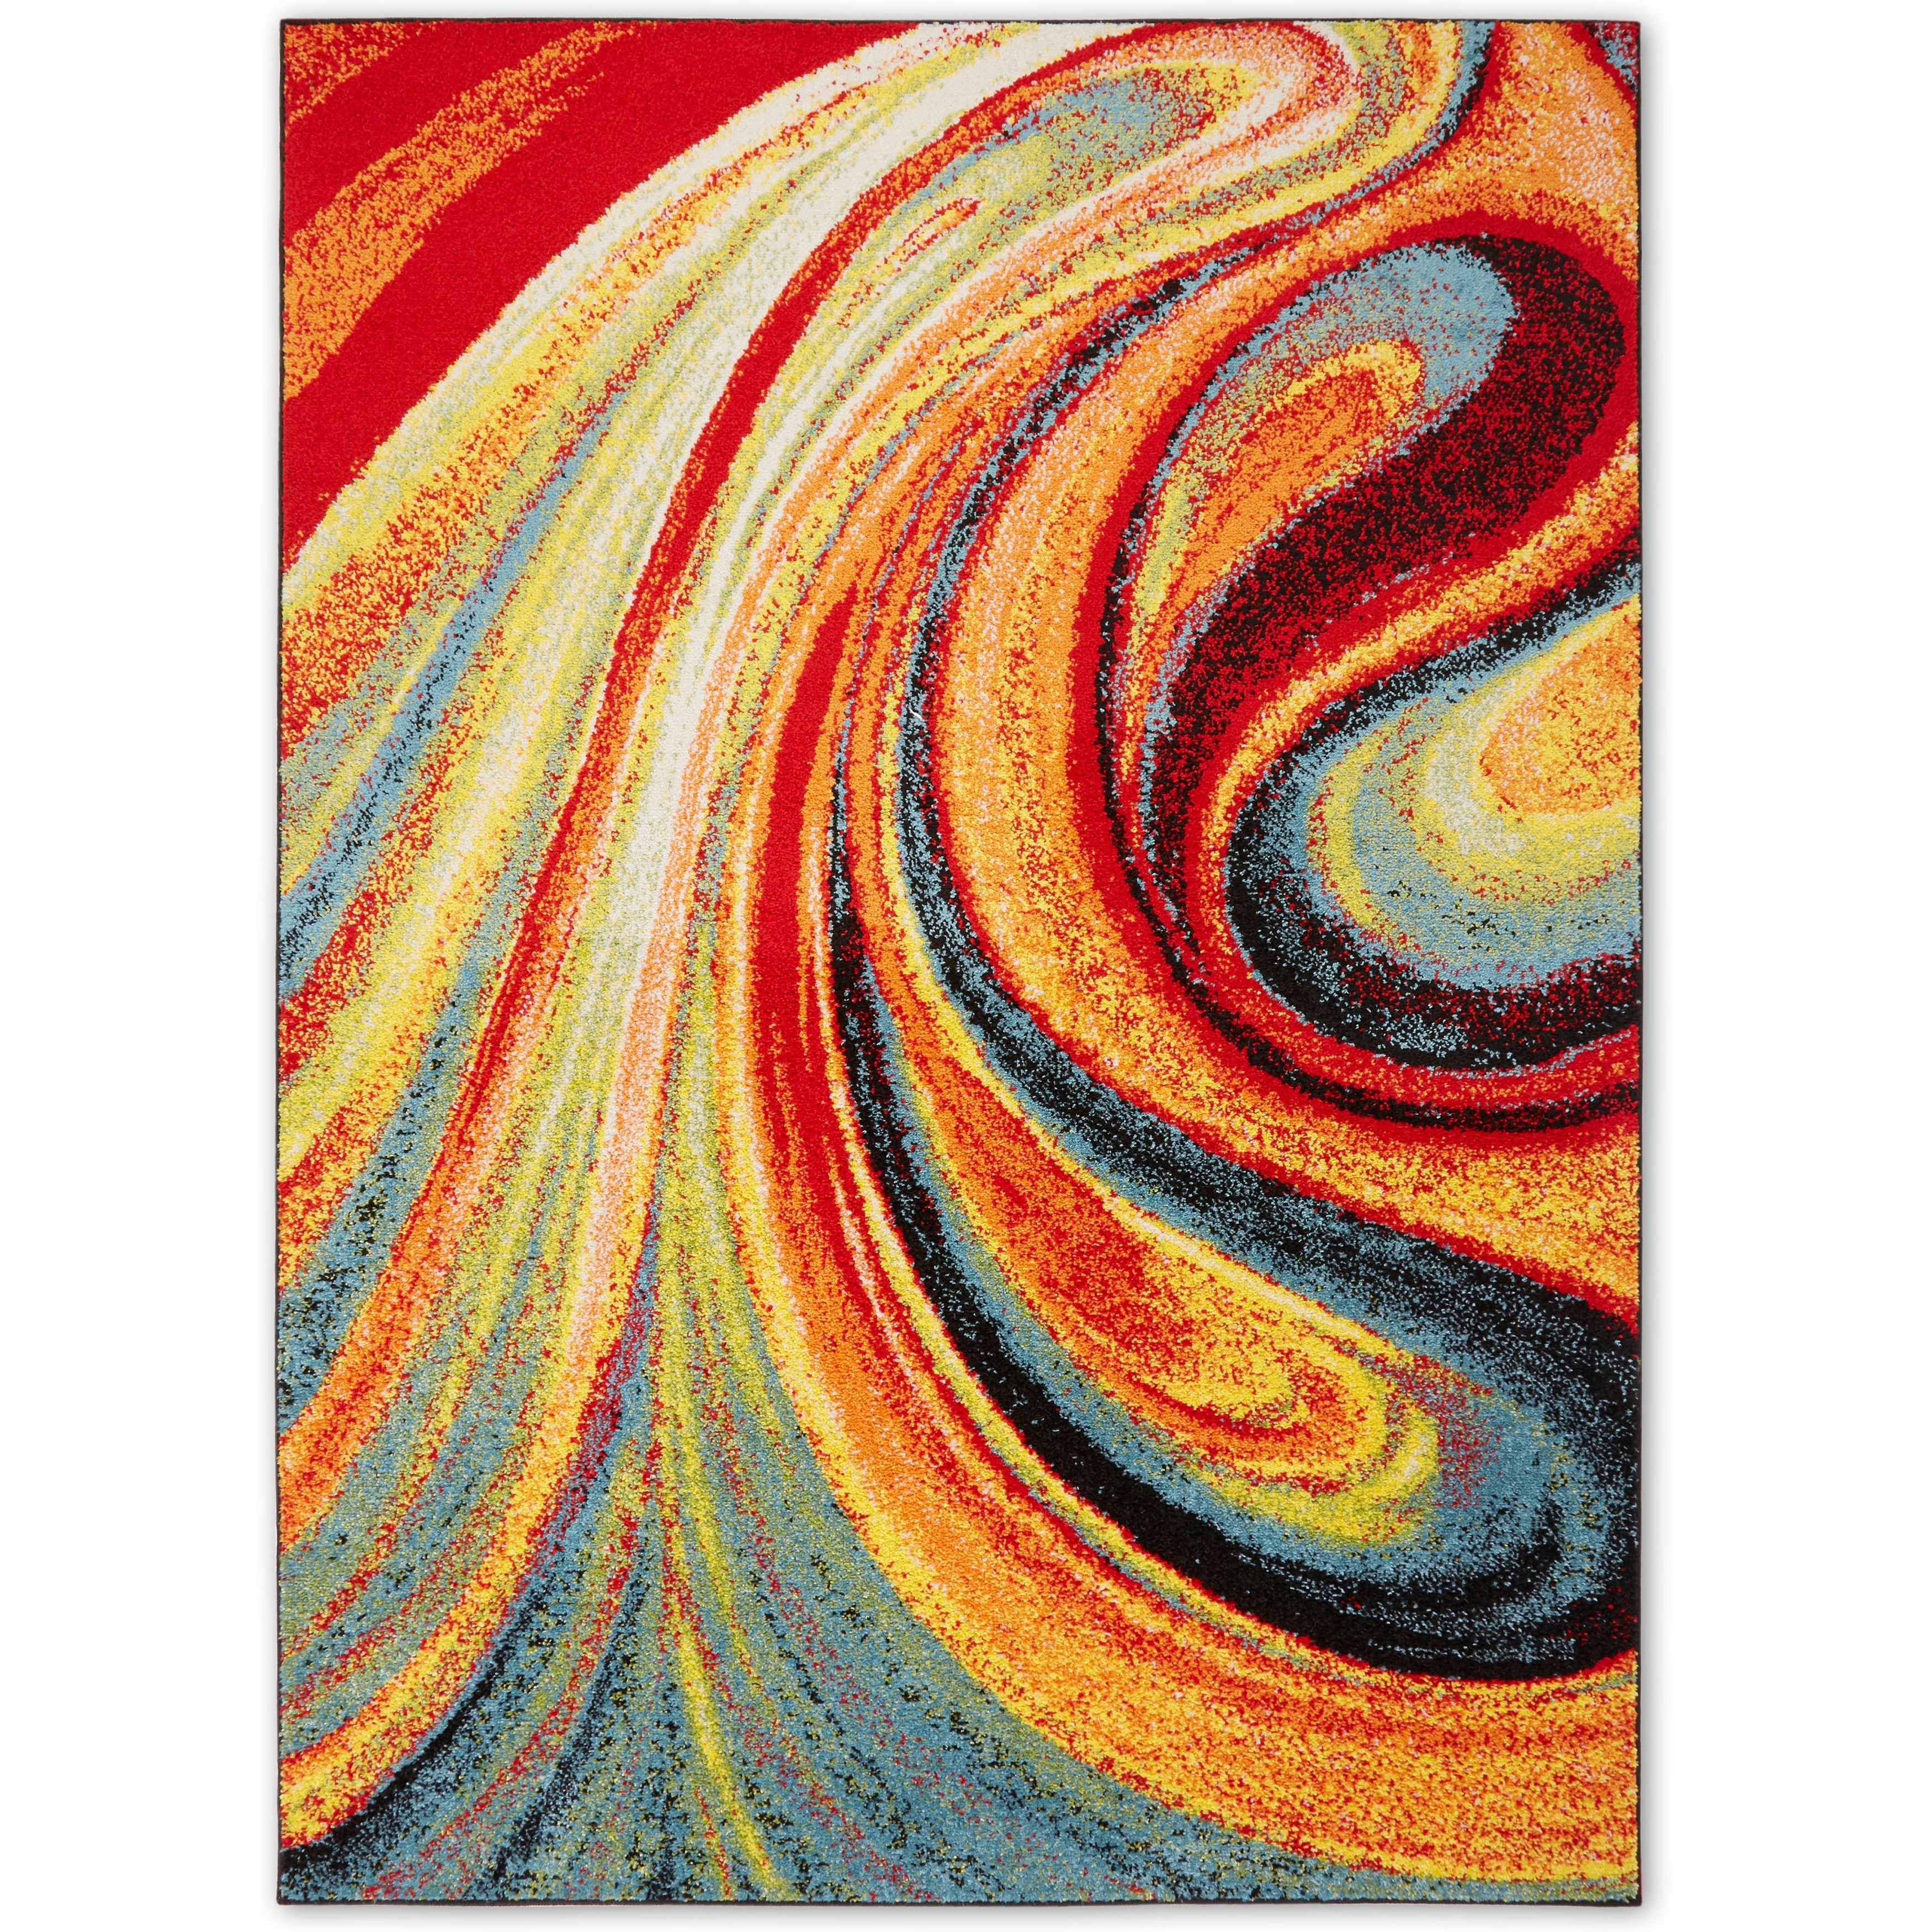 https://ak1.ostkcdn.com/images/products/is/images/direct/cc23727a32570c36e43947eafeb7d4b97478a6db/Home-Dynamix-Splash-Adja-Contemporary-Abstract-Area-Rug.jpg